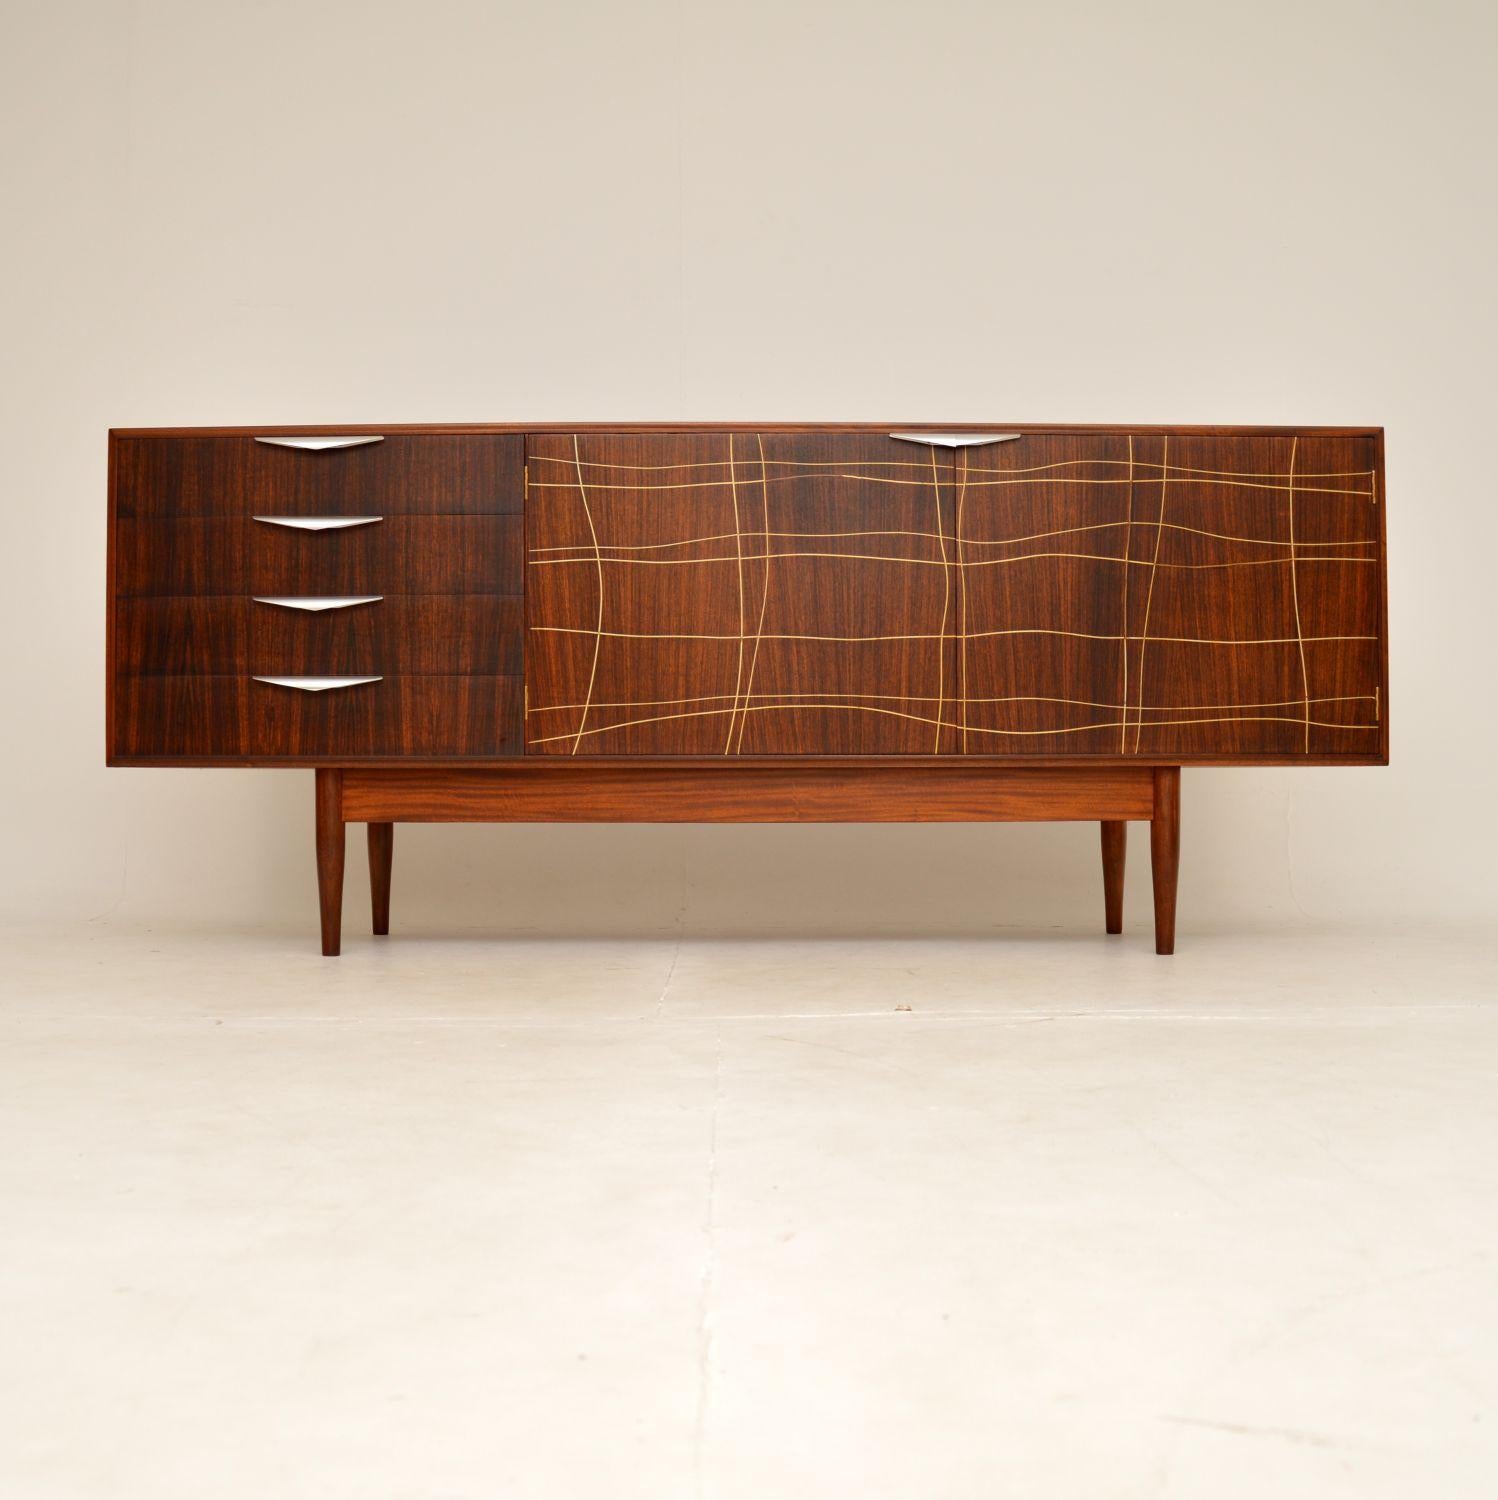 A very rare, impressive and stylish vintage sideboard. This was made in England by Dalescraft, it dates from the 1960’s.

It has an interesting and unusual design, with inlaid brass patterns on the two door fronts. The handles are brushed steel,